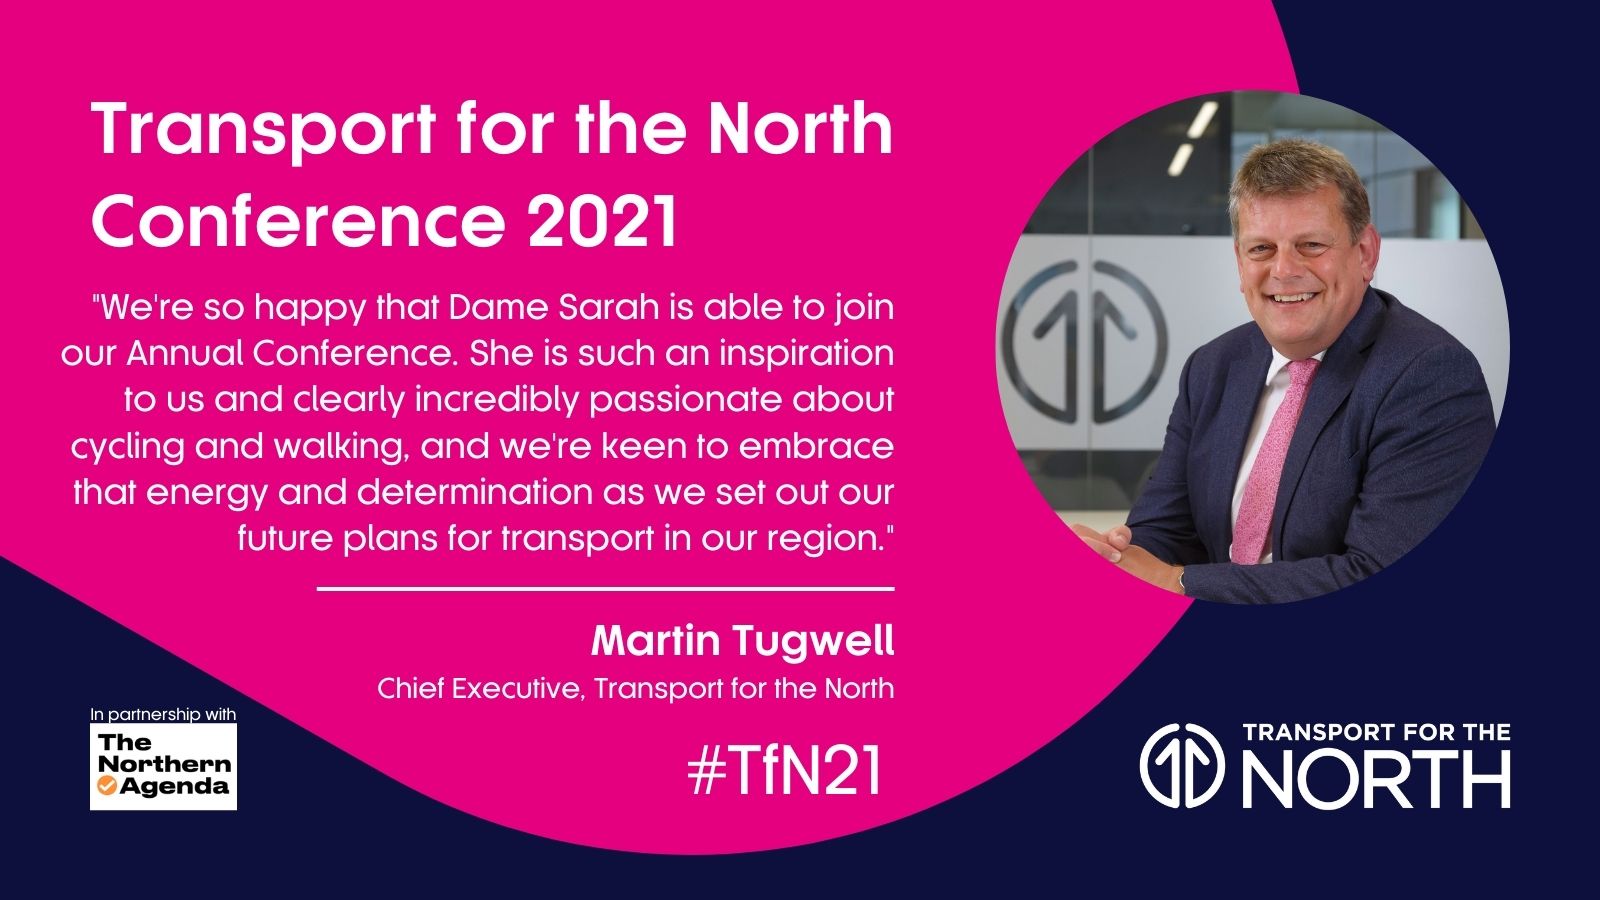 Transport for the North Chief Executive Martin Tugwell welcomes Dame Sarah Storey to the Annual Conference